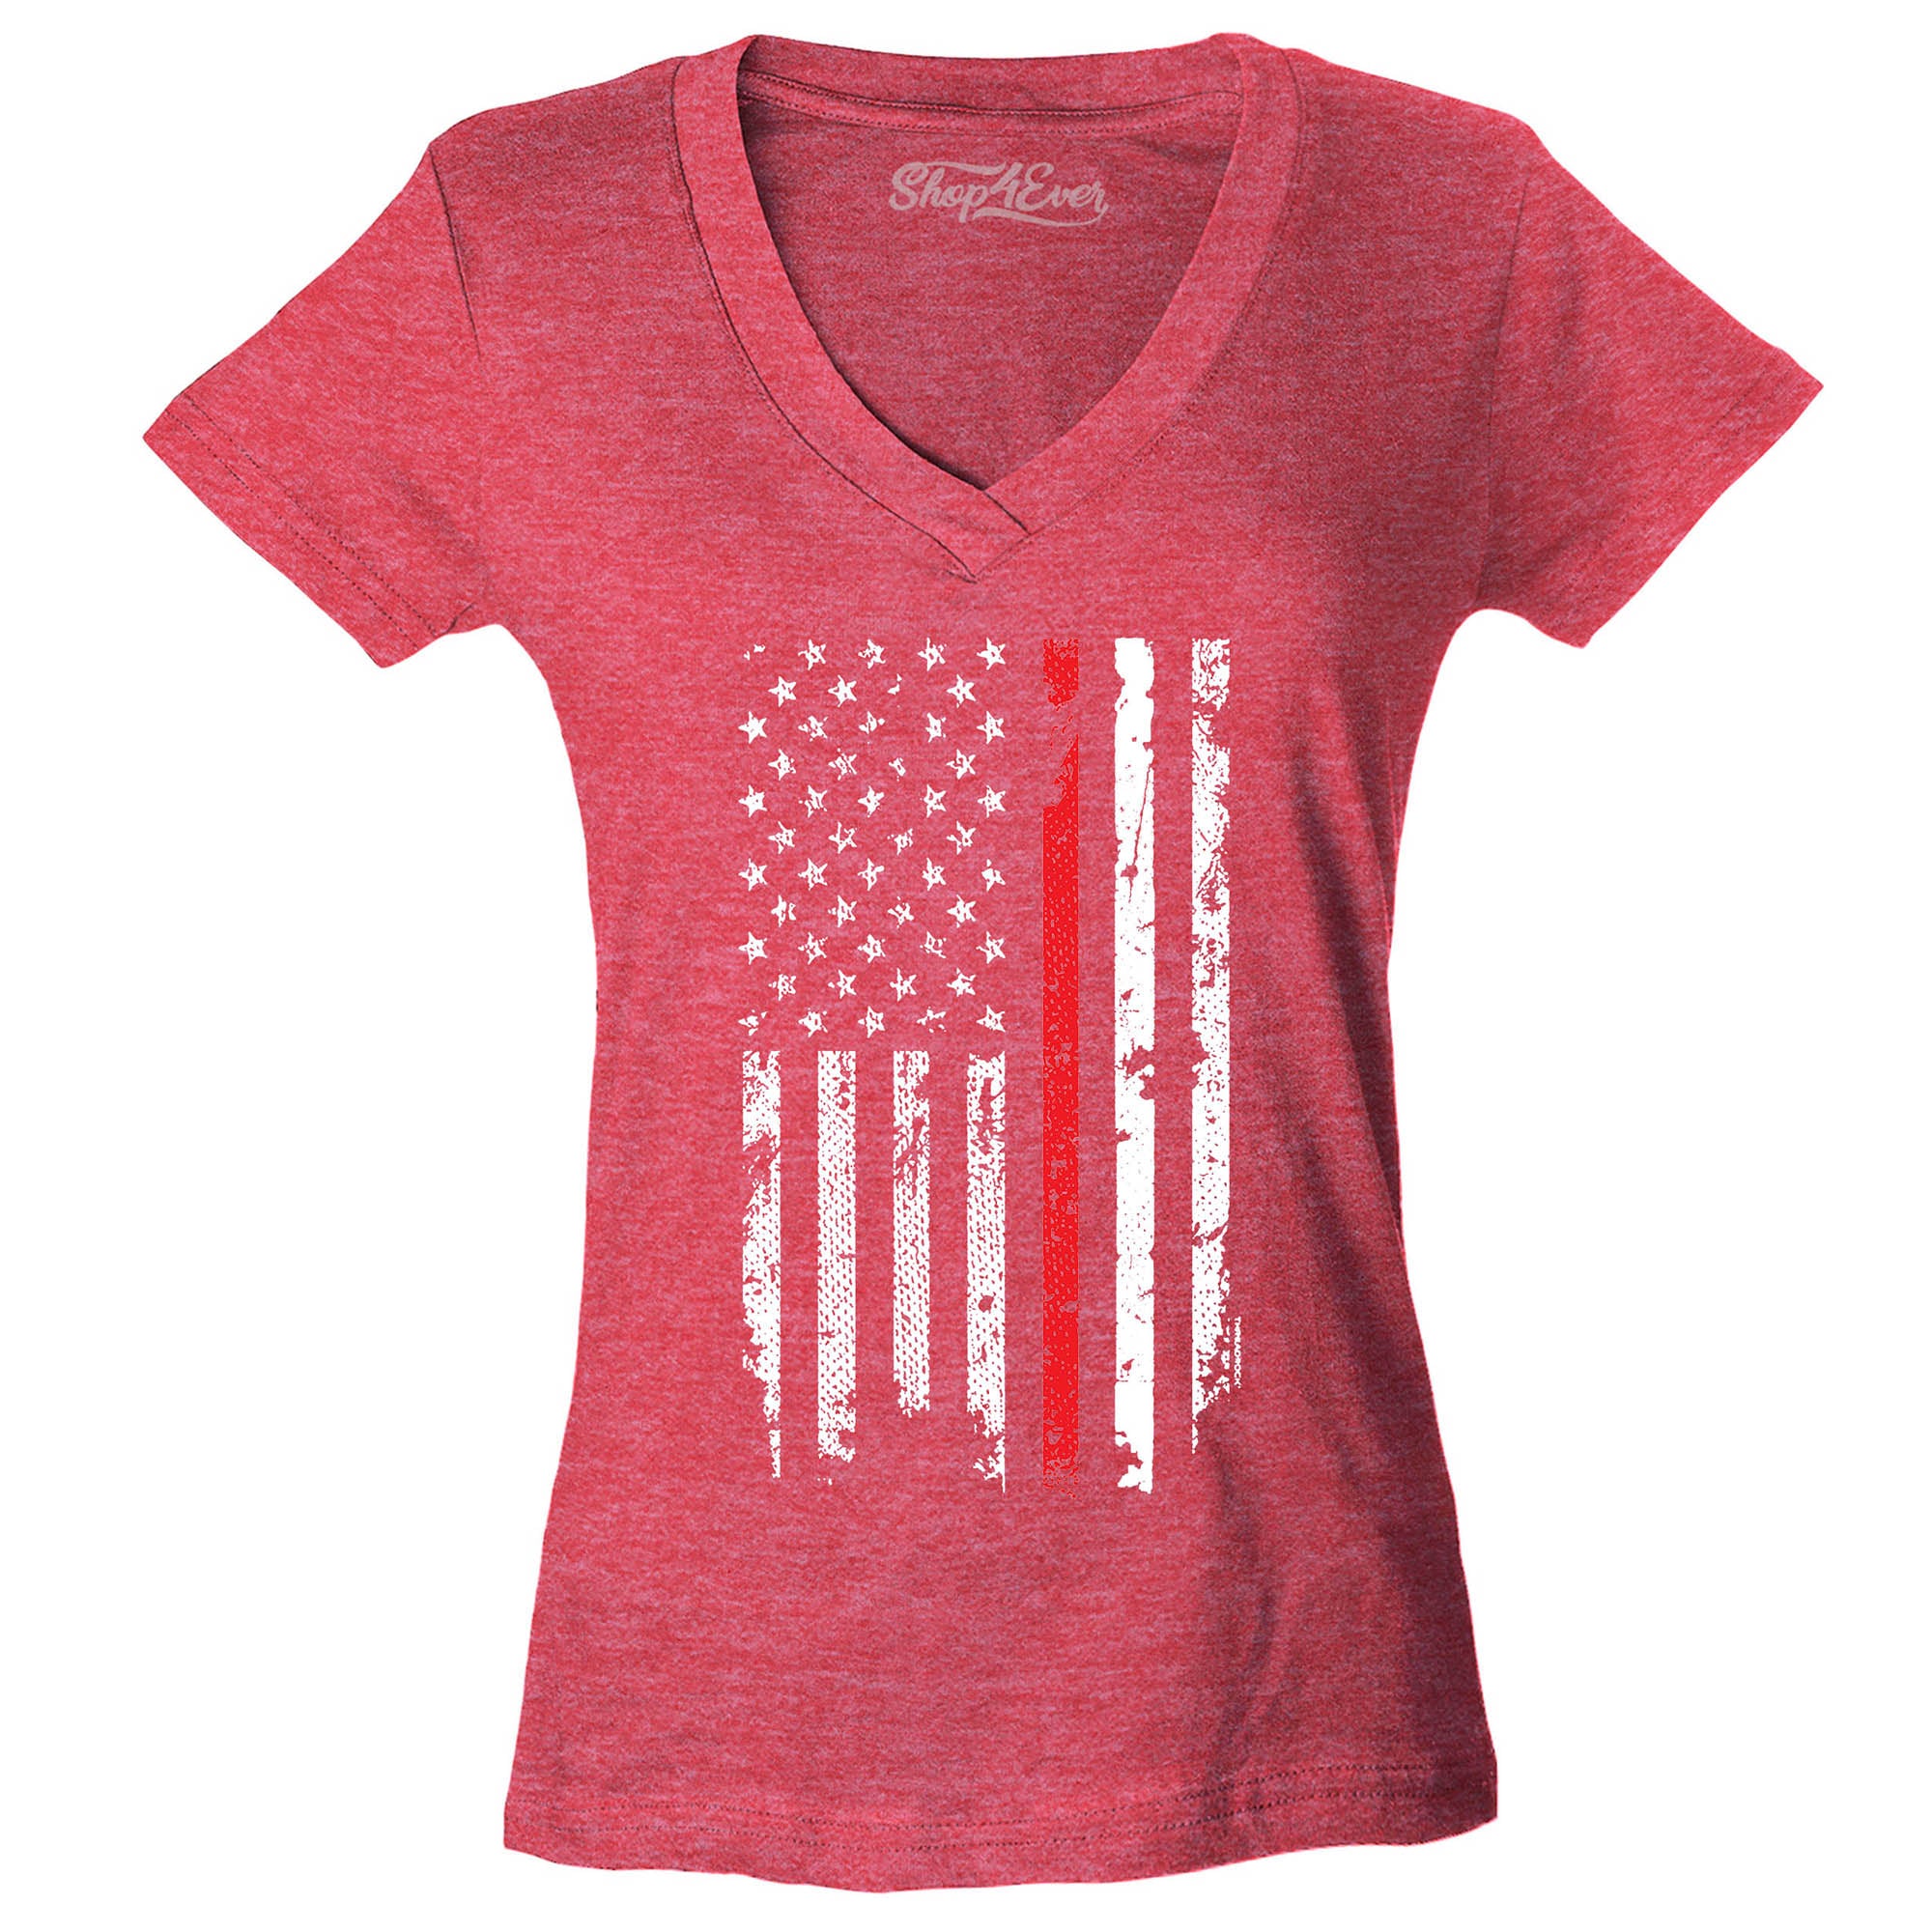 Firefighter American Flag Red Line Stripe USA Women's V-Neck T-Shirt 4th of July Shirts Slim FIT